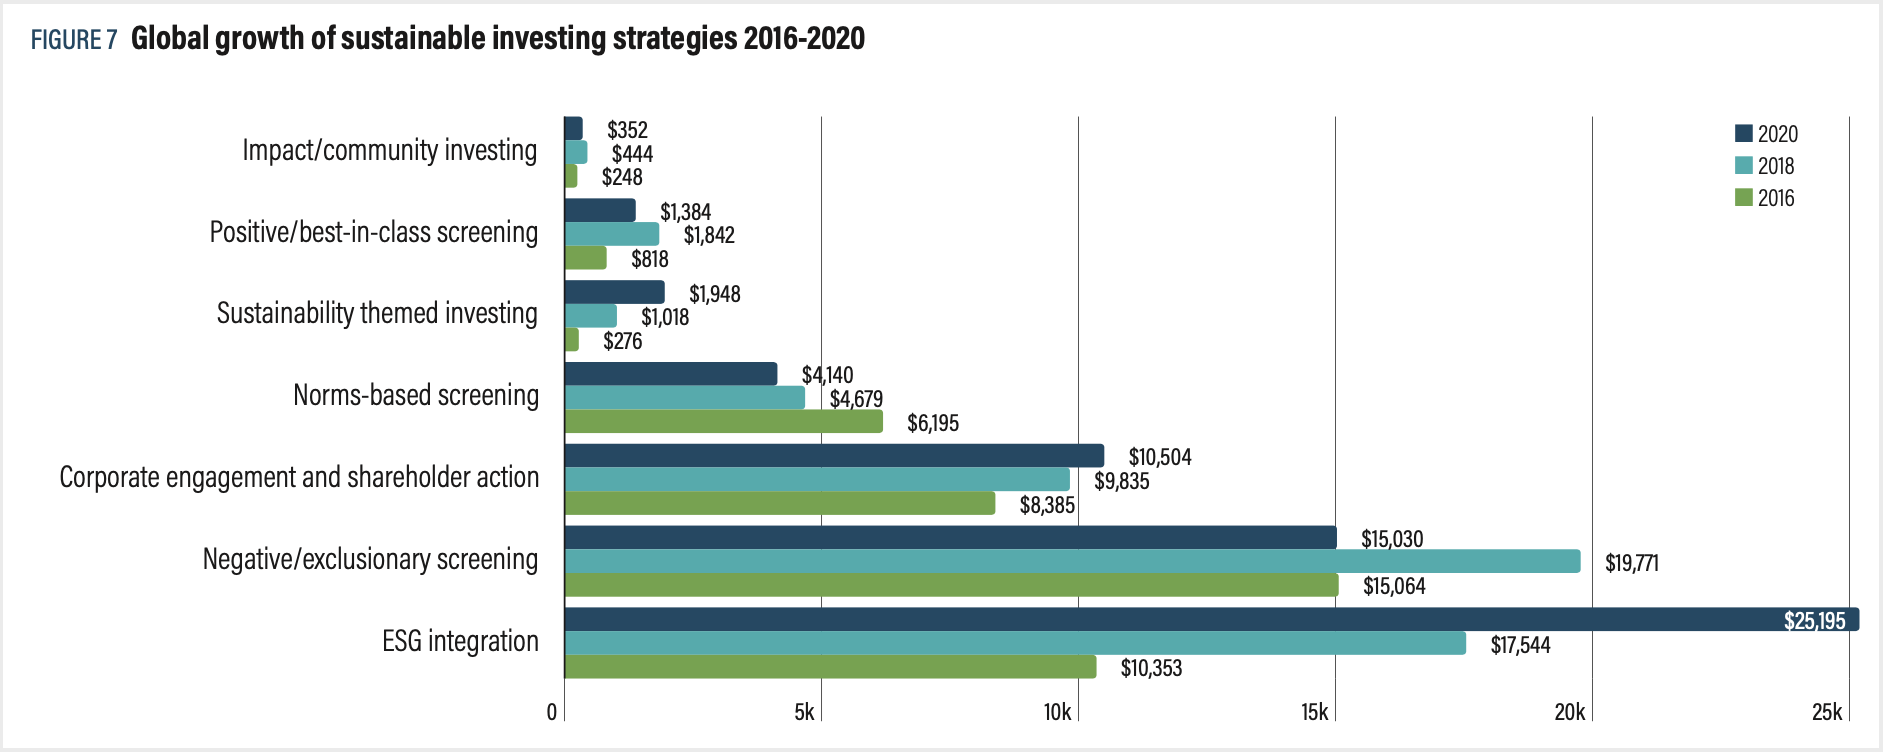 Global growth of sustainable investing strategies 2016-2020